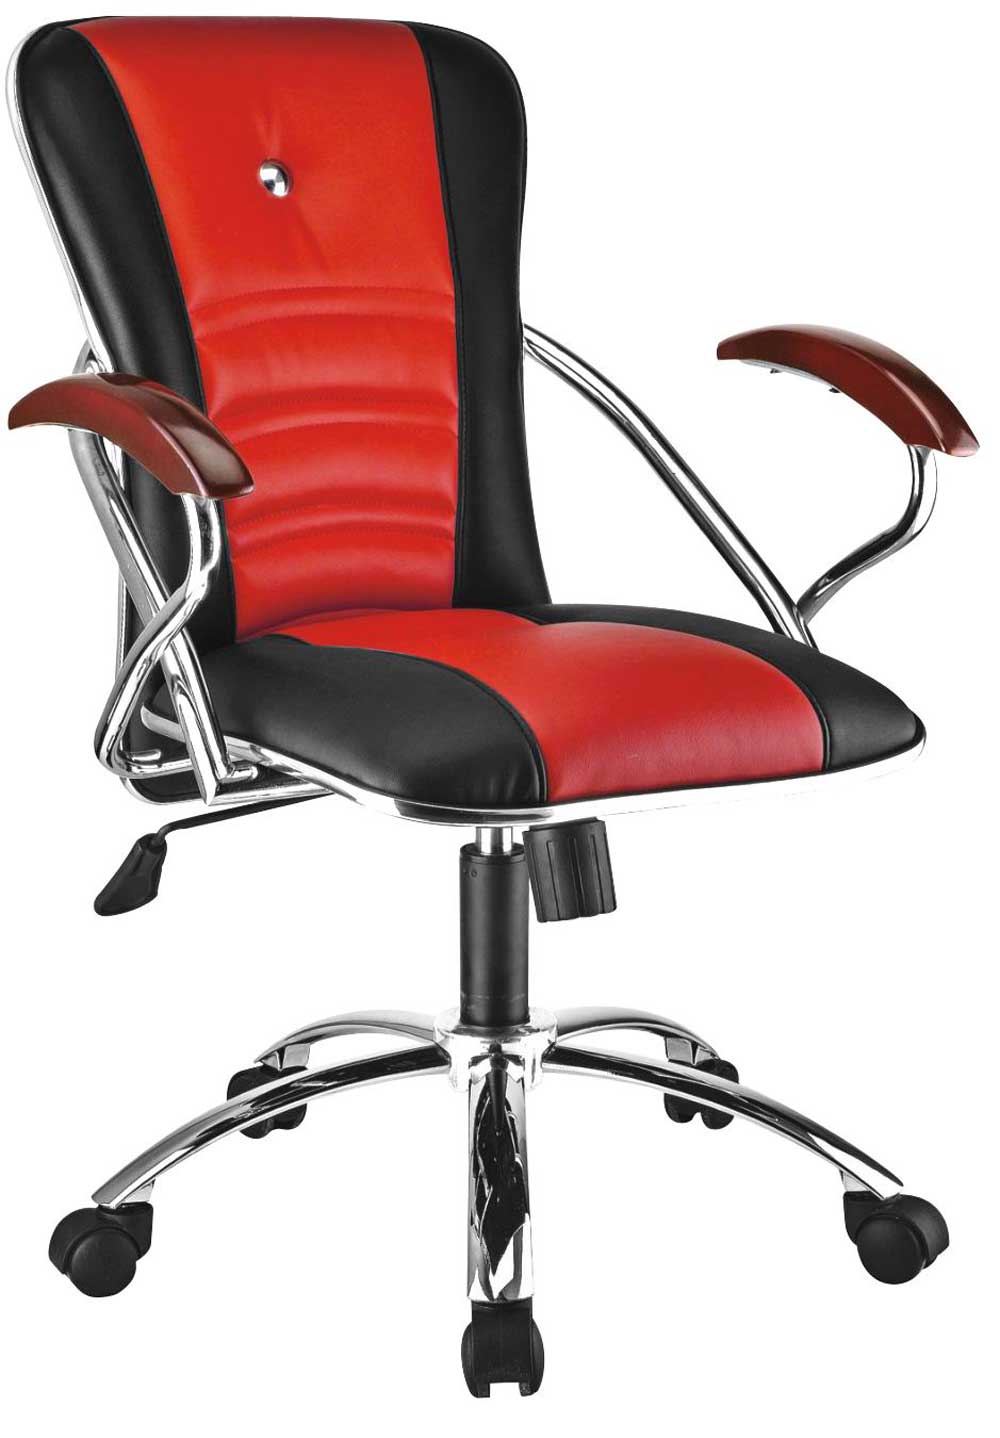 High Back Red And Black Ergonomic Office Manager Chair With Arms 